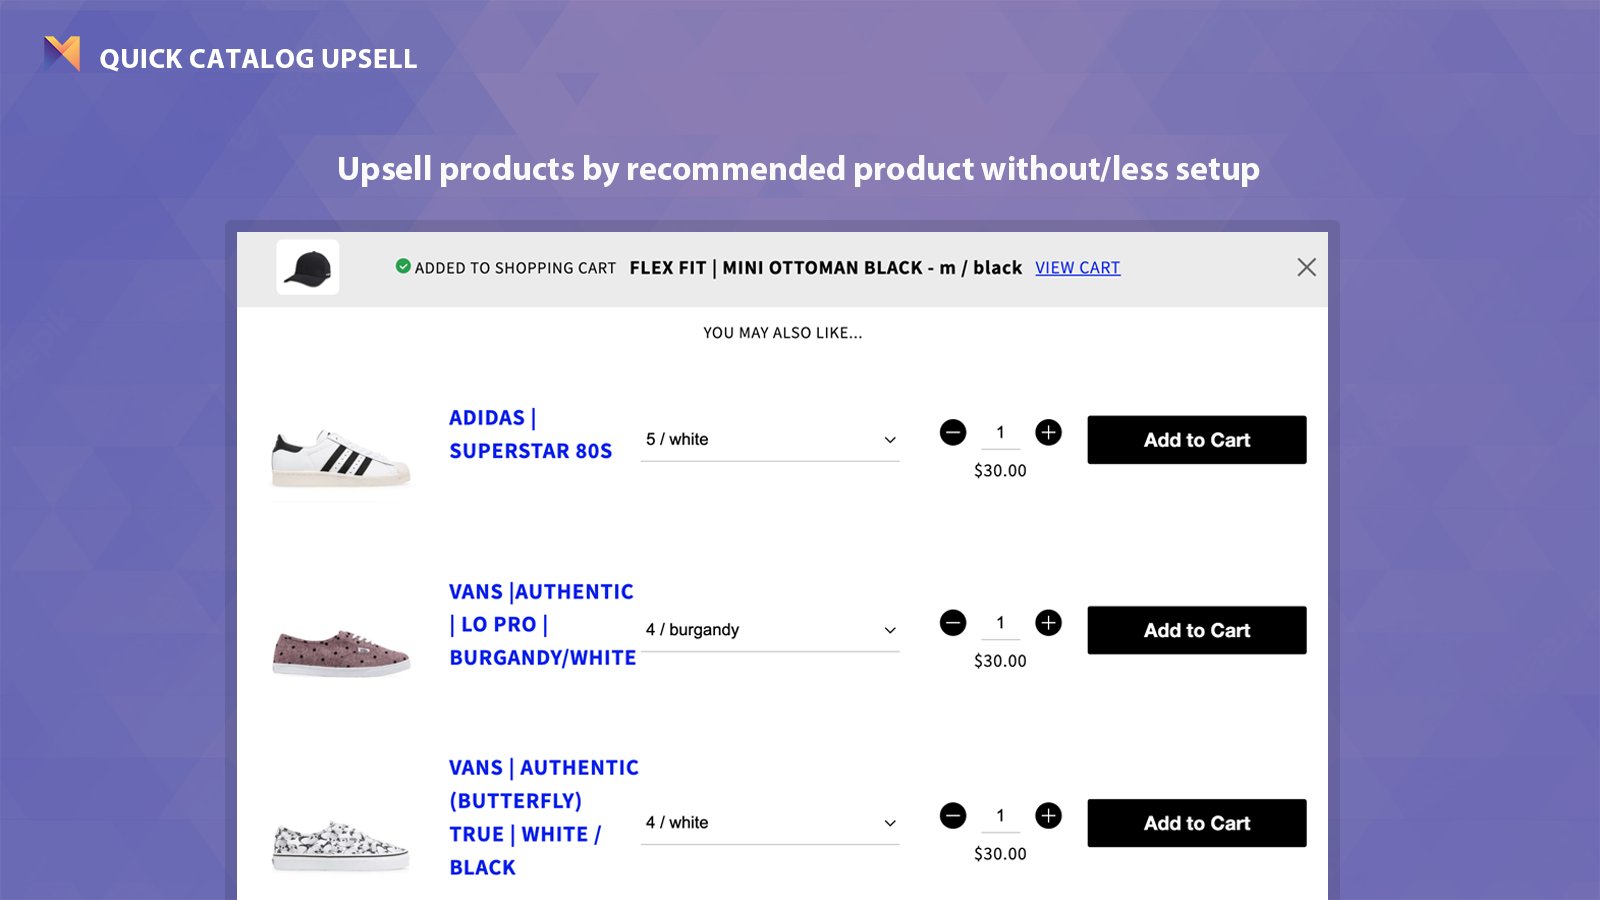 upsell recommended products